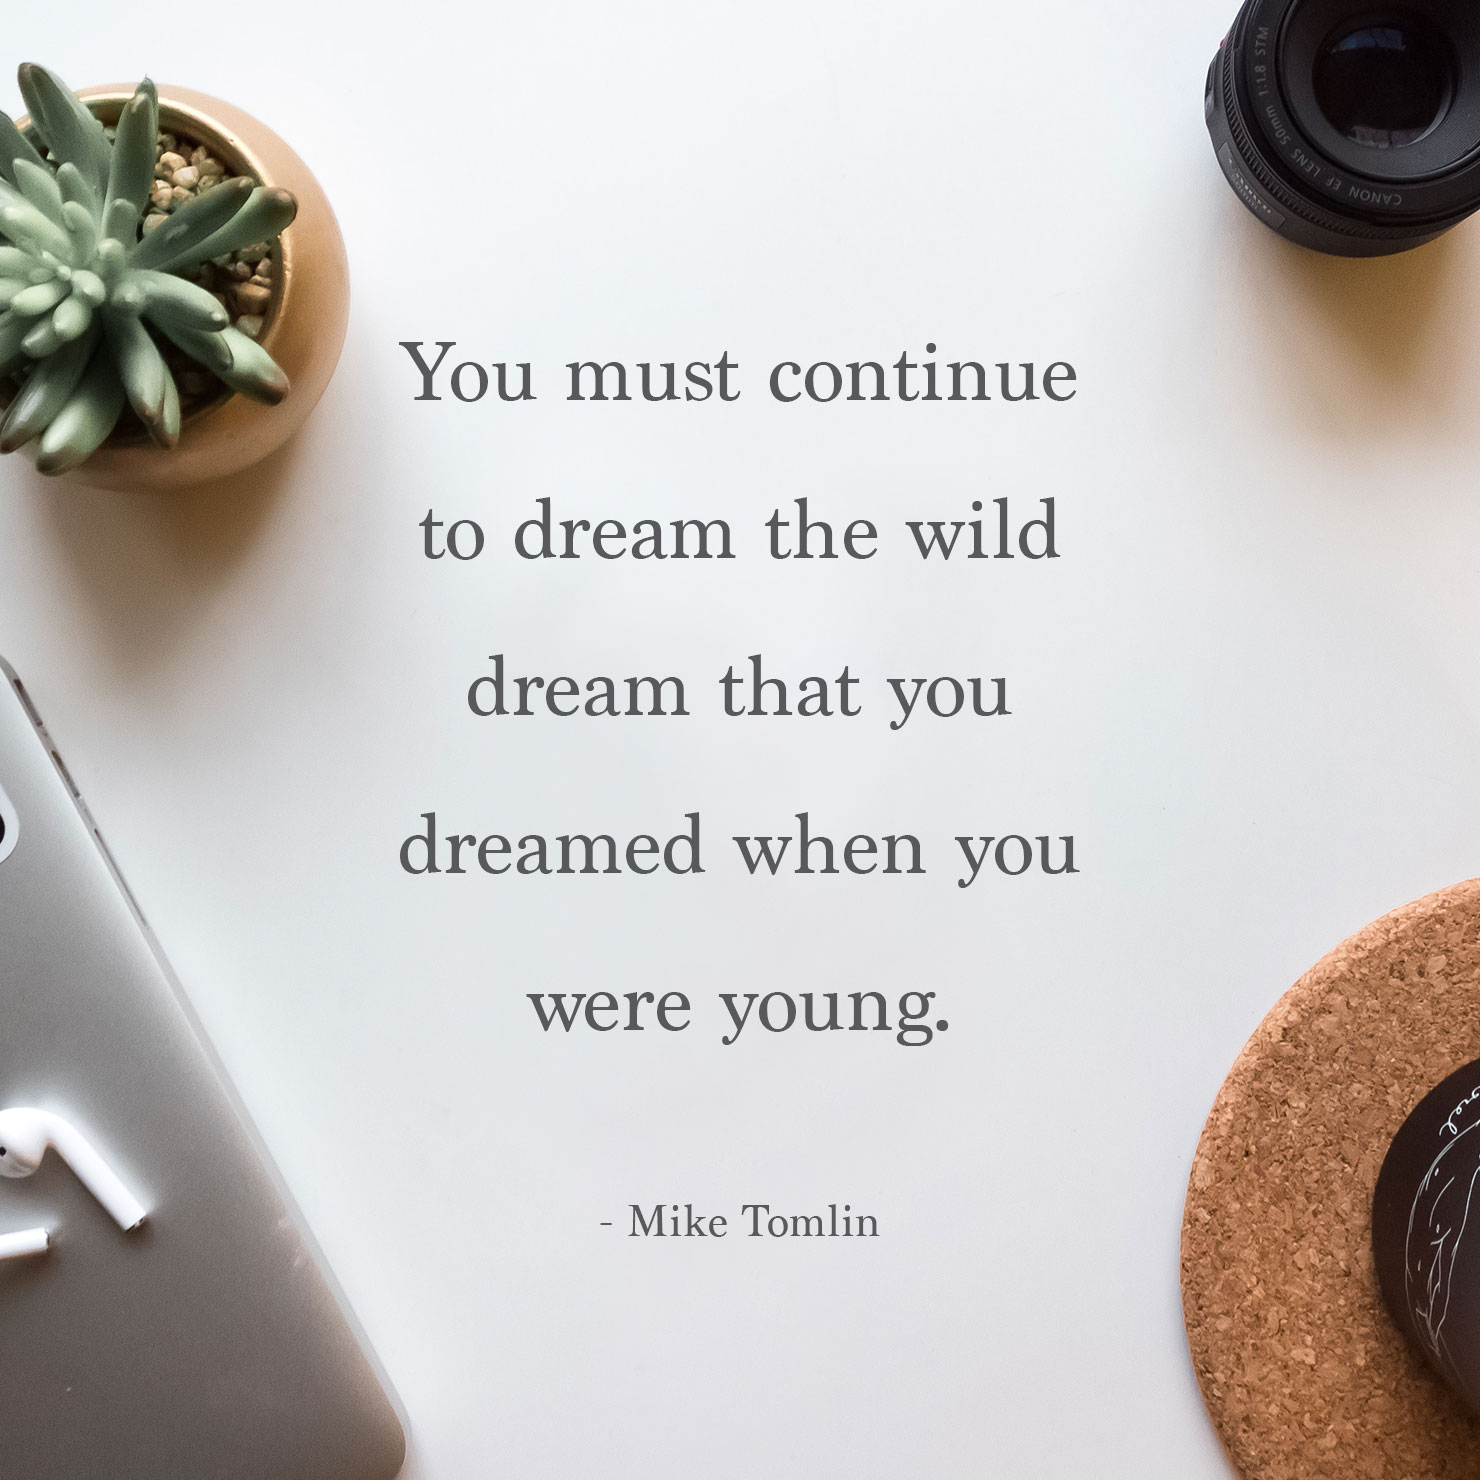 100+ Graduation Quotes and Sayings 2019 | Shutterfly